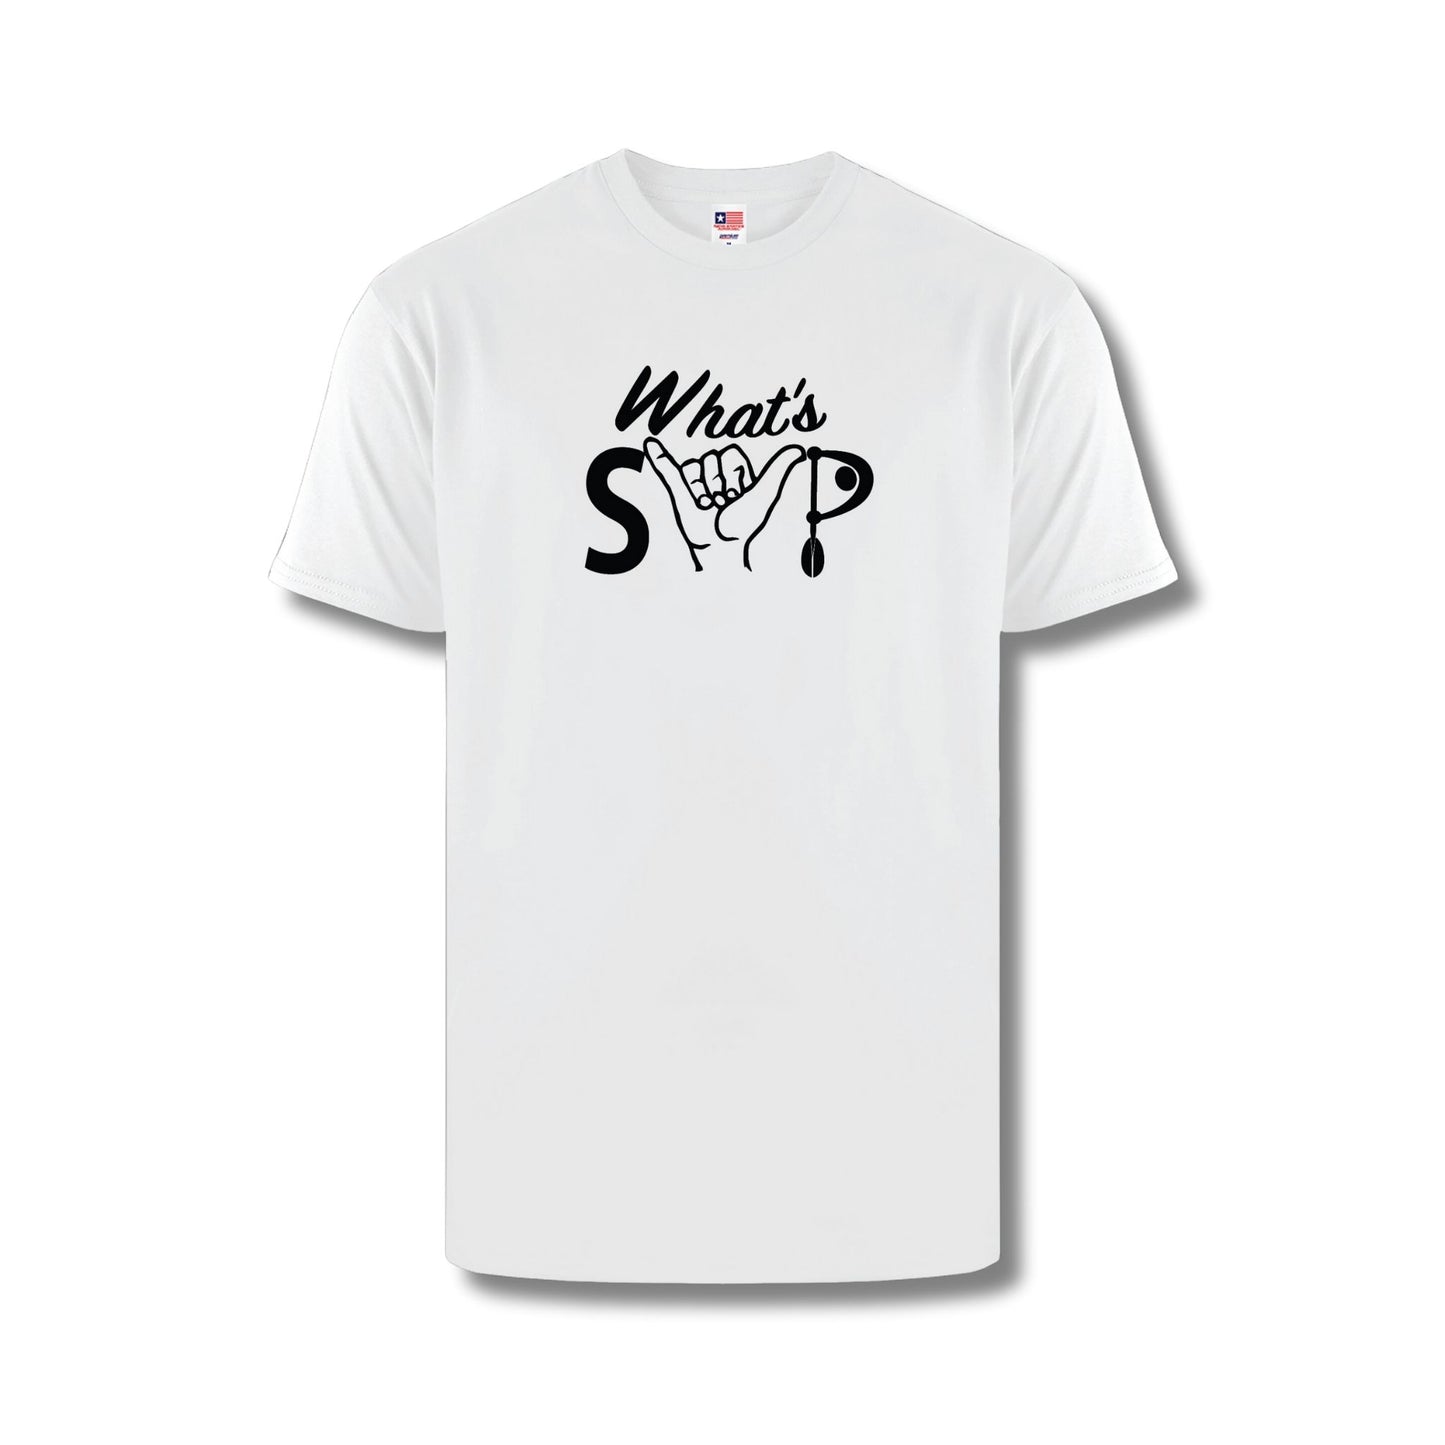 Priority SUP T-shirts | Whats UP | Unisex S,M,L,XL,XXL